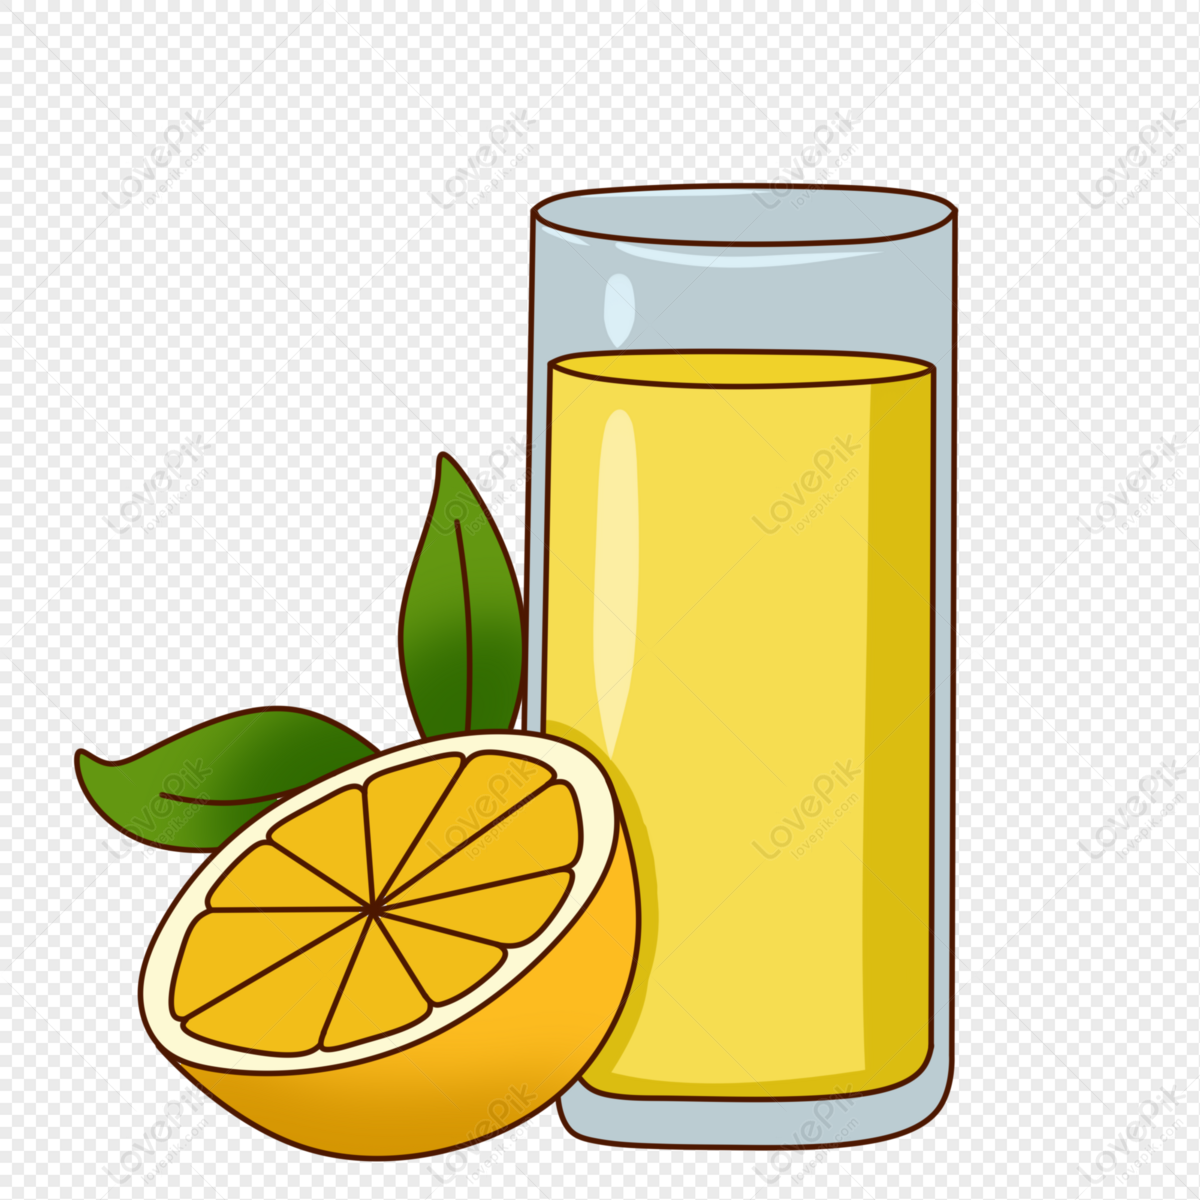 Cartoon Hand Painted Lemon Juice Free PNG And Clipart Image For Free  Download - Lovepik | 401108799